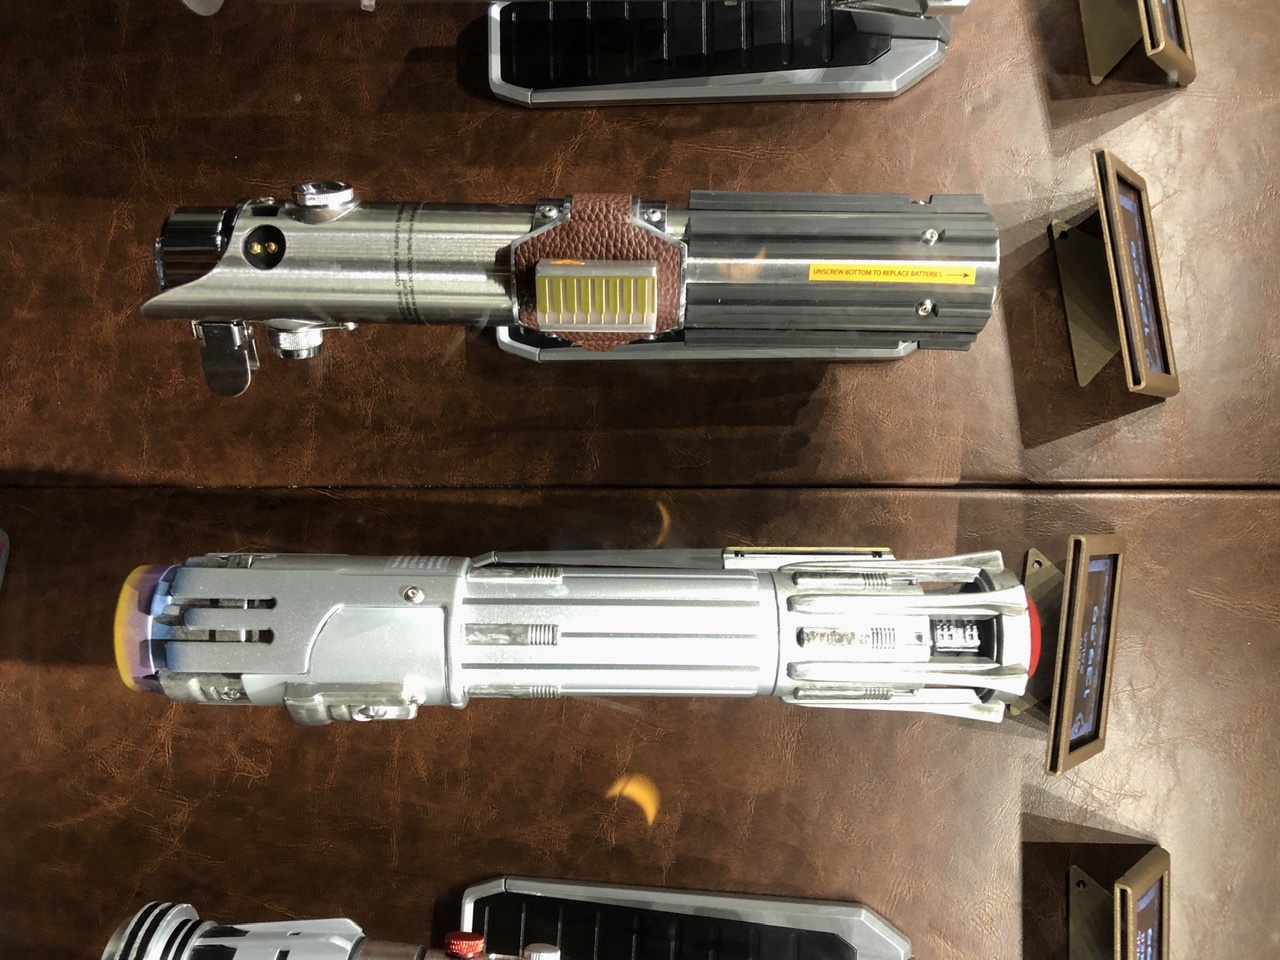 Two New Lightsabers at Star Wars: Galaxy’s Edge!